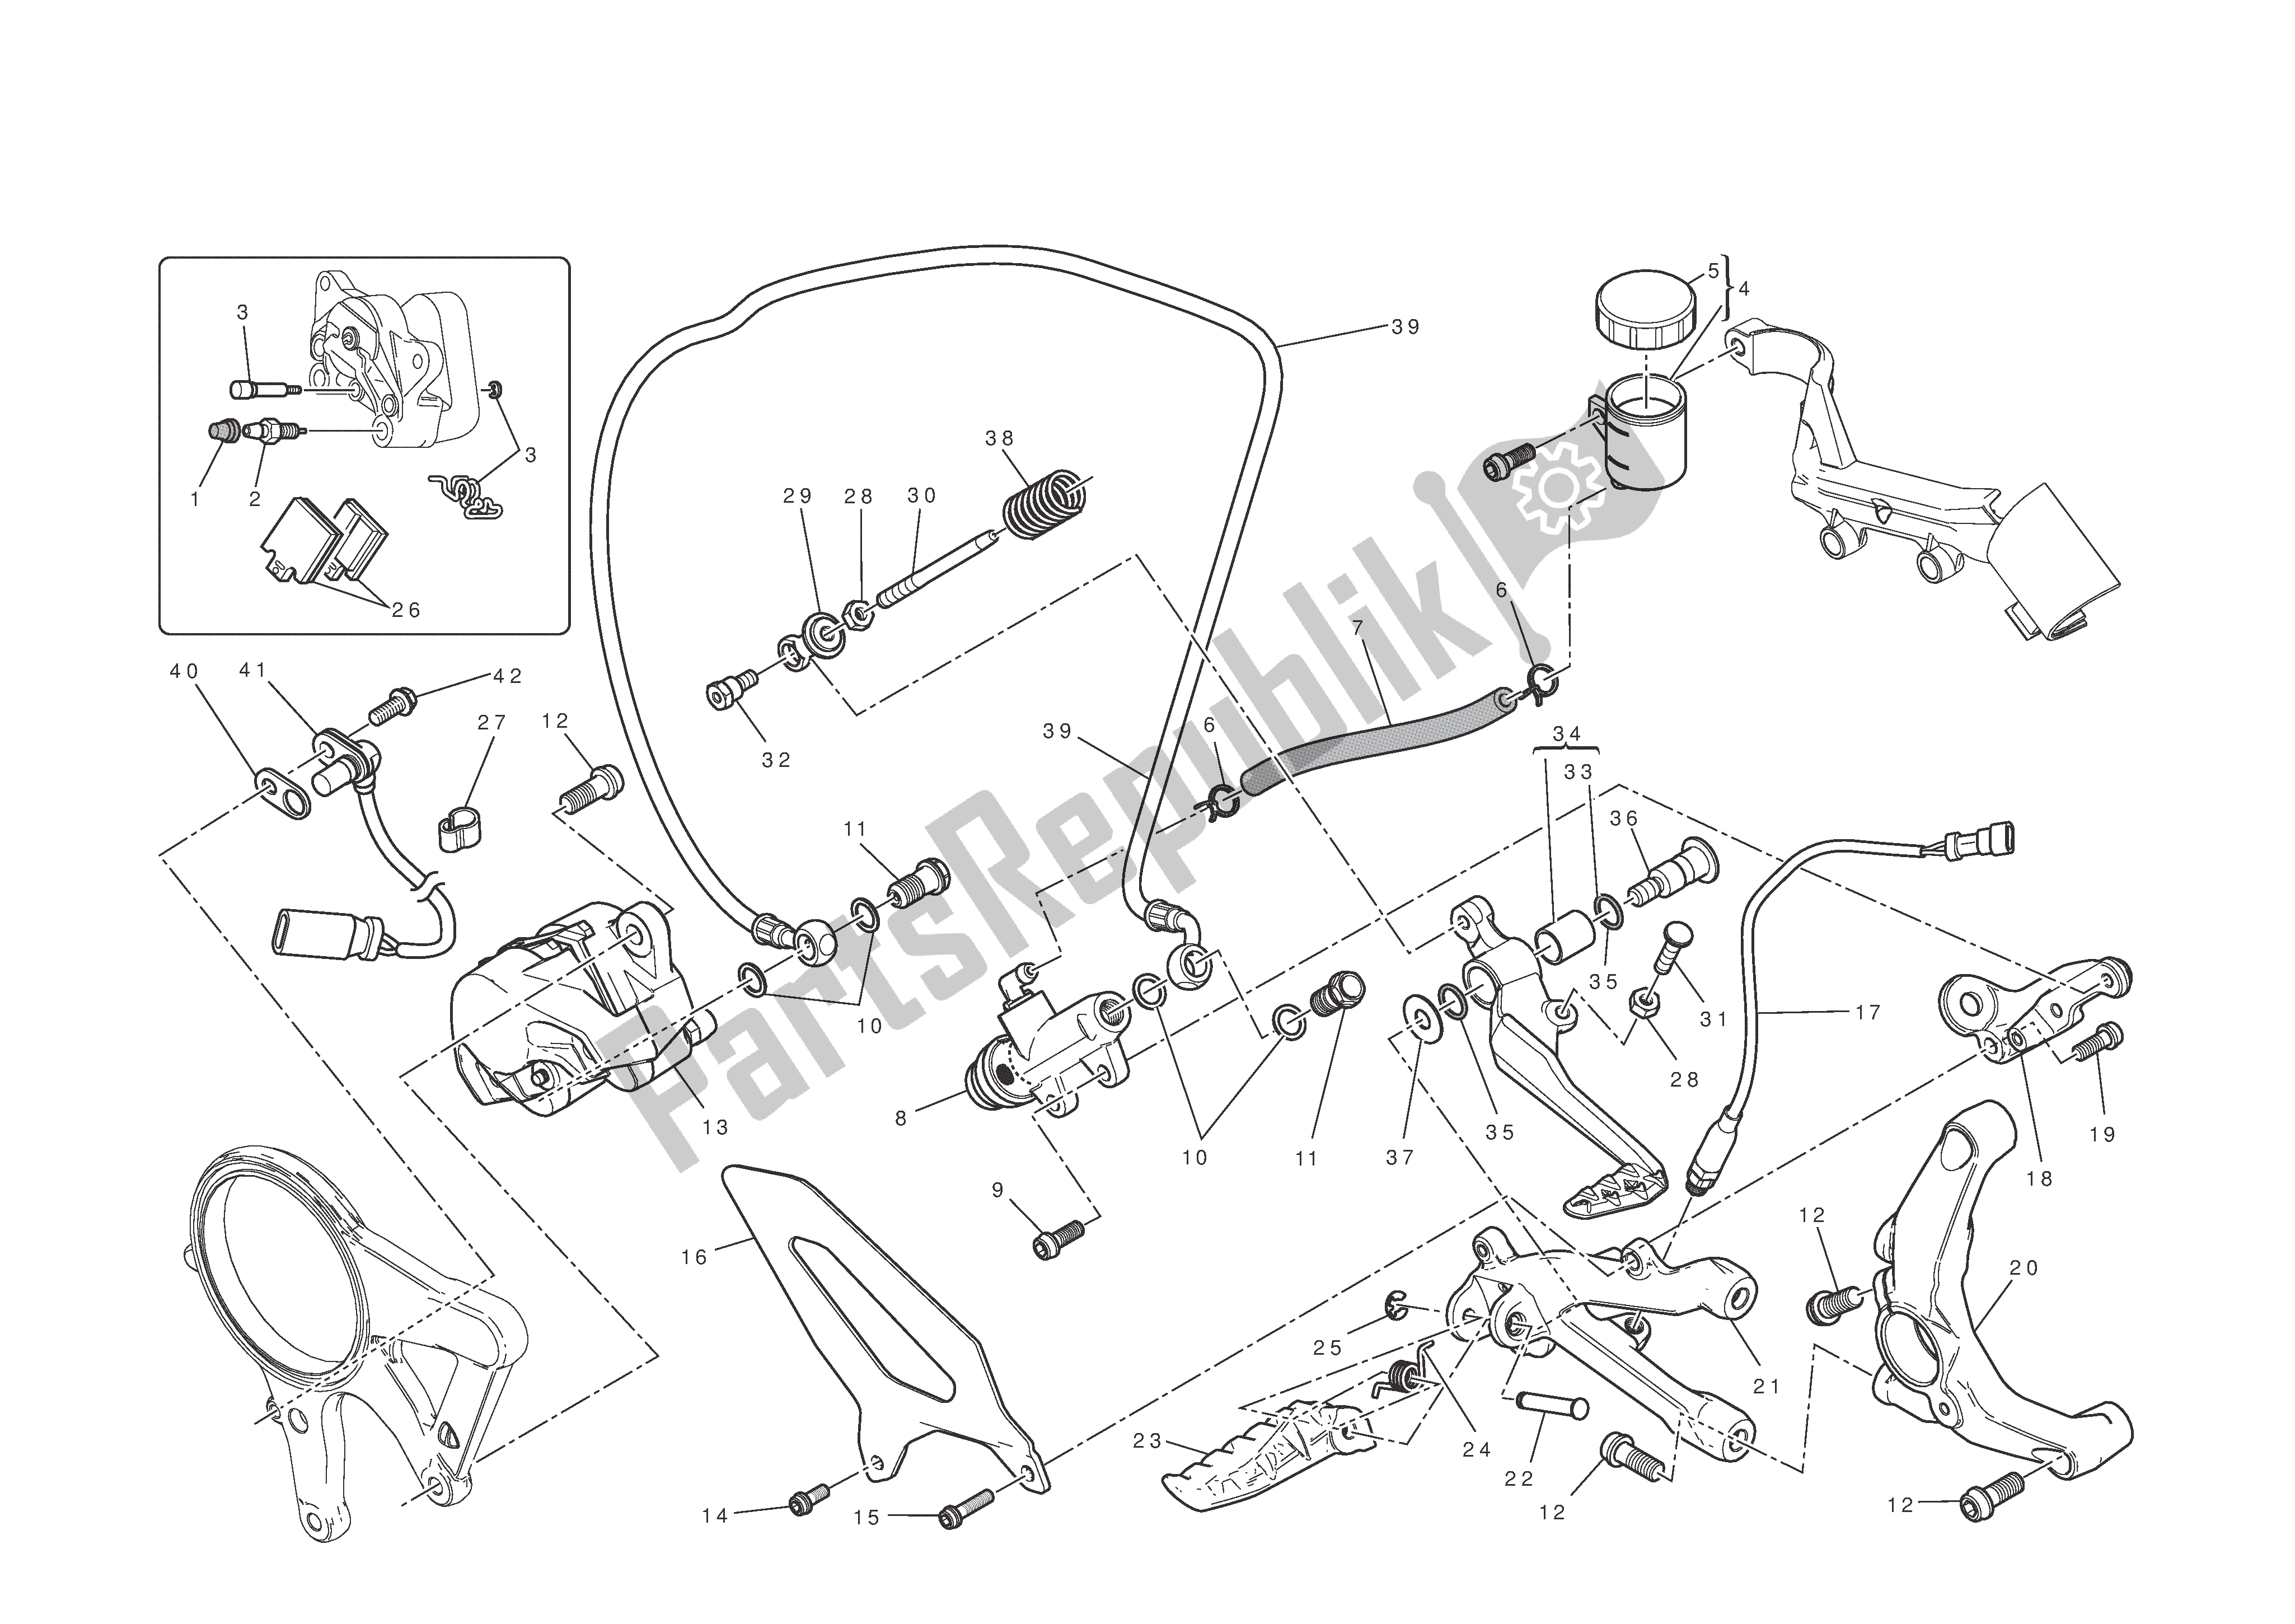 All parts for the Rear Brake of the Ducati 1199 Panigale S 2012